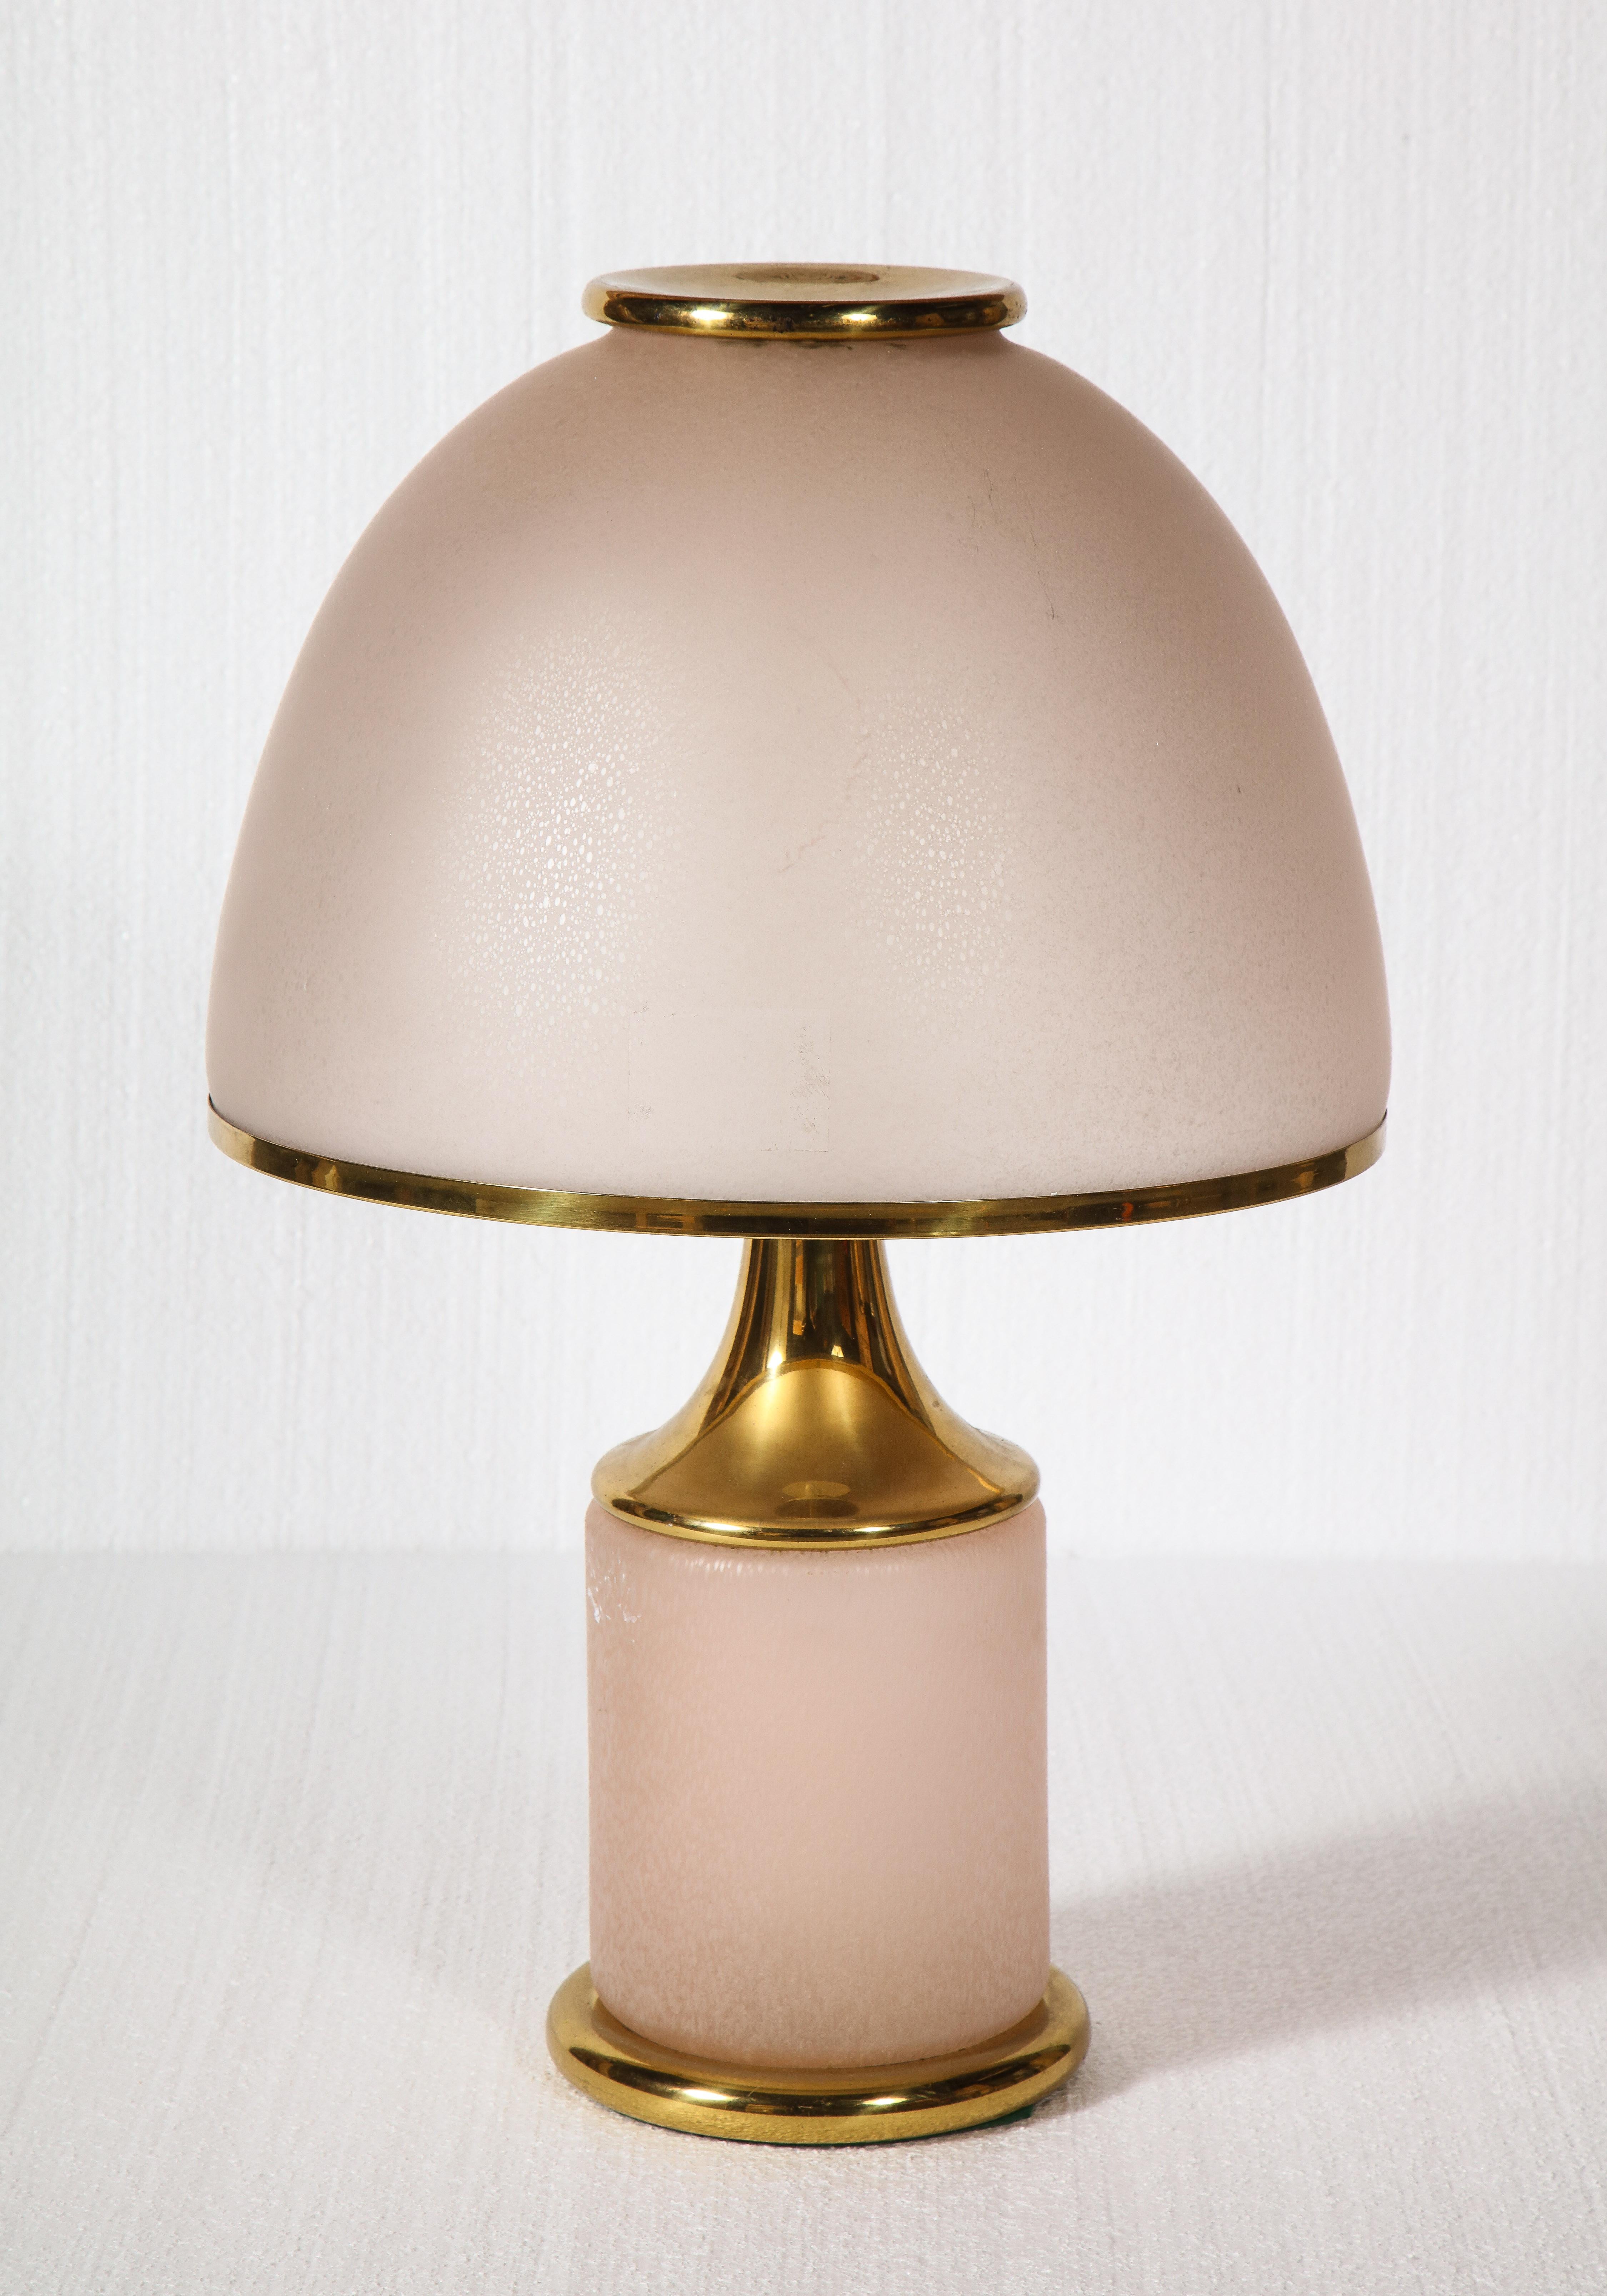 Vintage glass and brass large pink beige lamp, 1970-1980, Italy.

Beautiful large and chic brass and pink lamp from Italy.